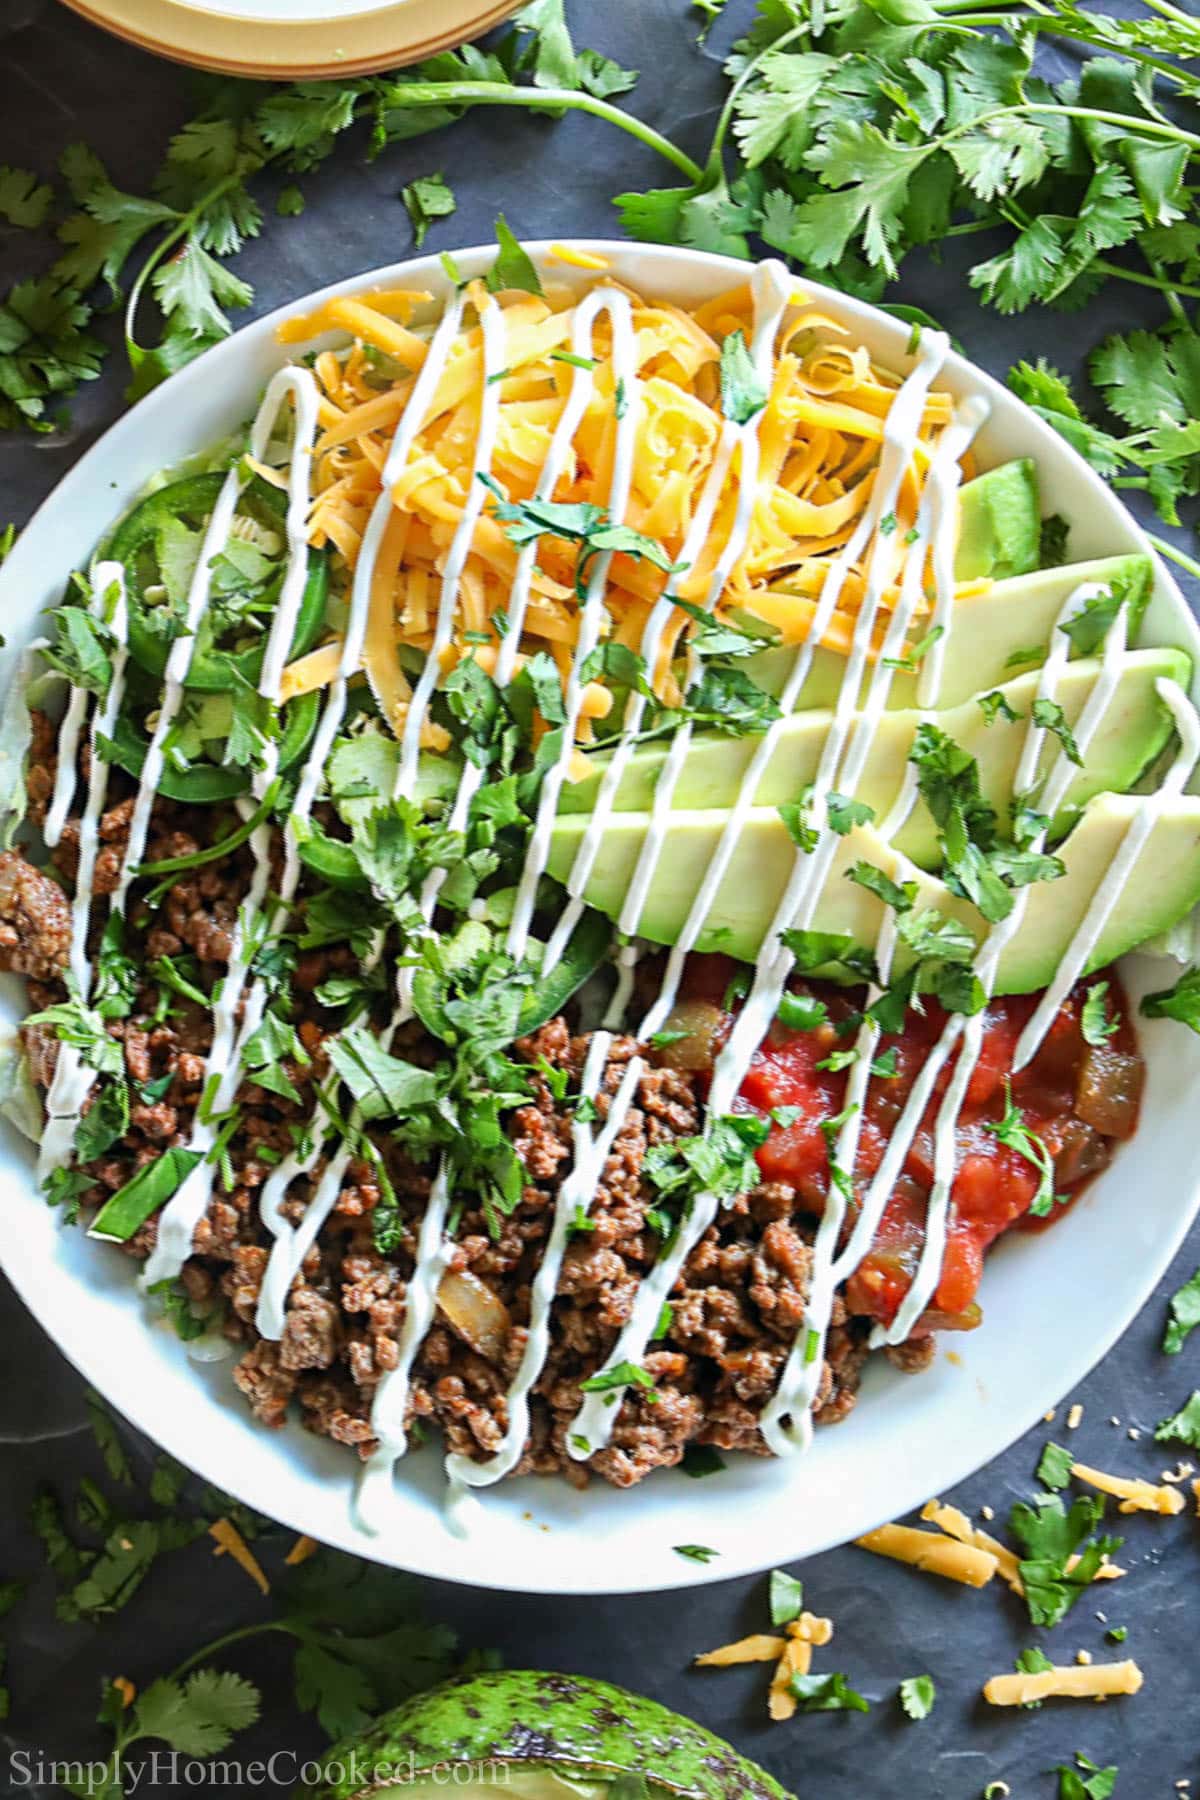 https://simplyhomecooked.com/wp-content/uploads/2022/01/taco-bowls.jpg